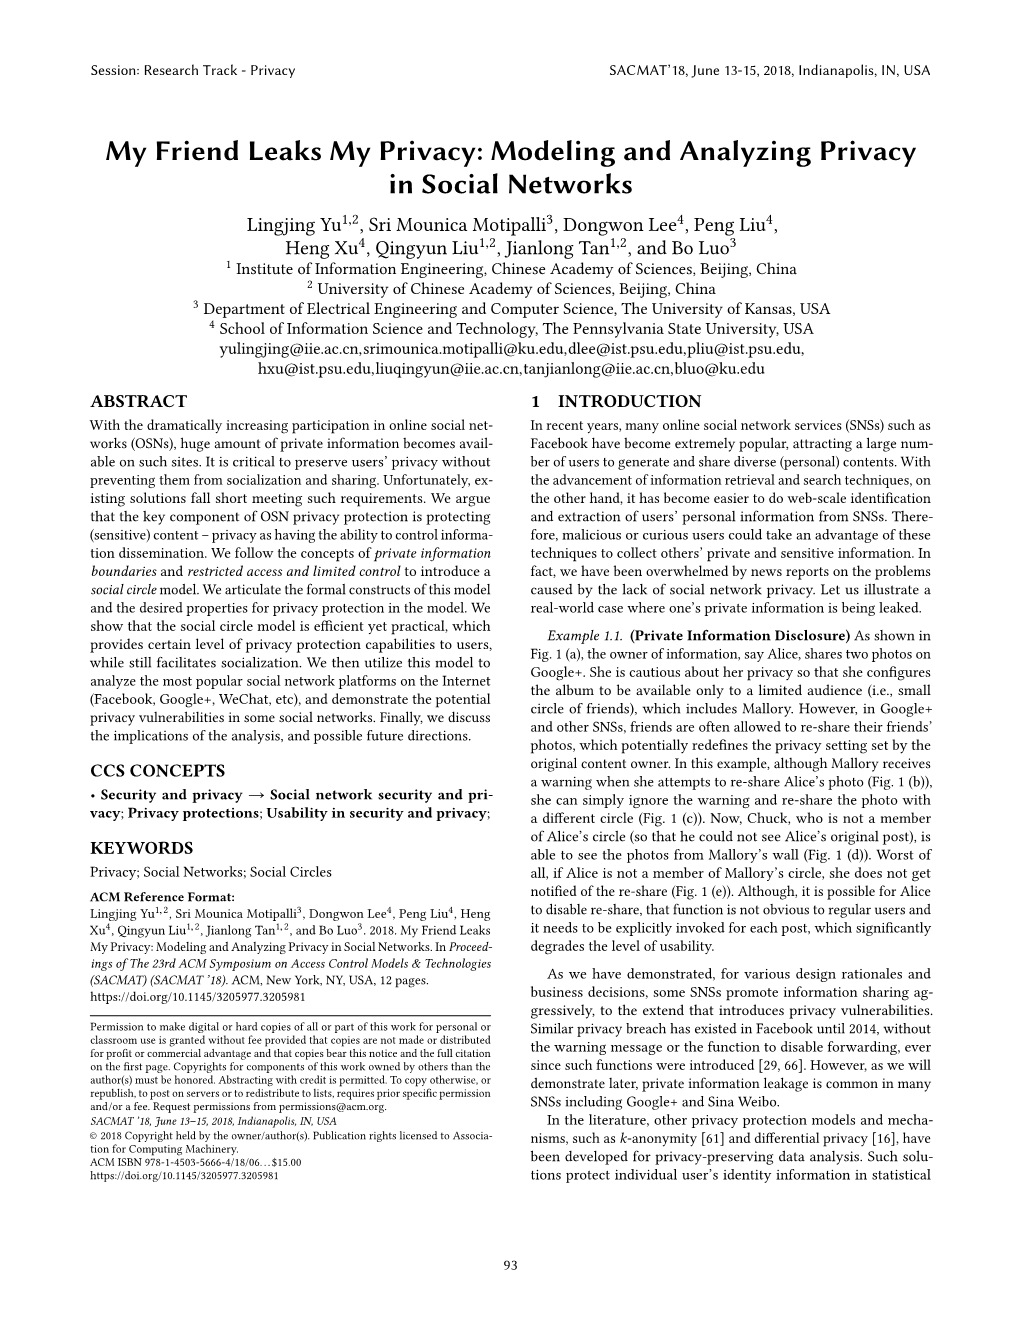 Modeling and Analyzing Privacy in Social Networks